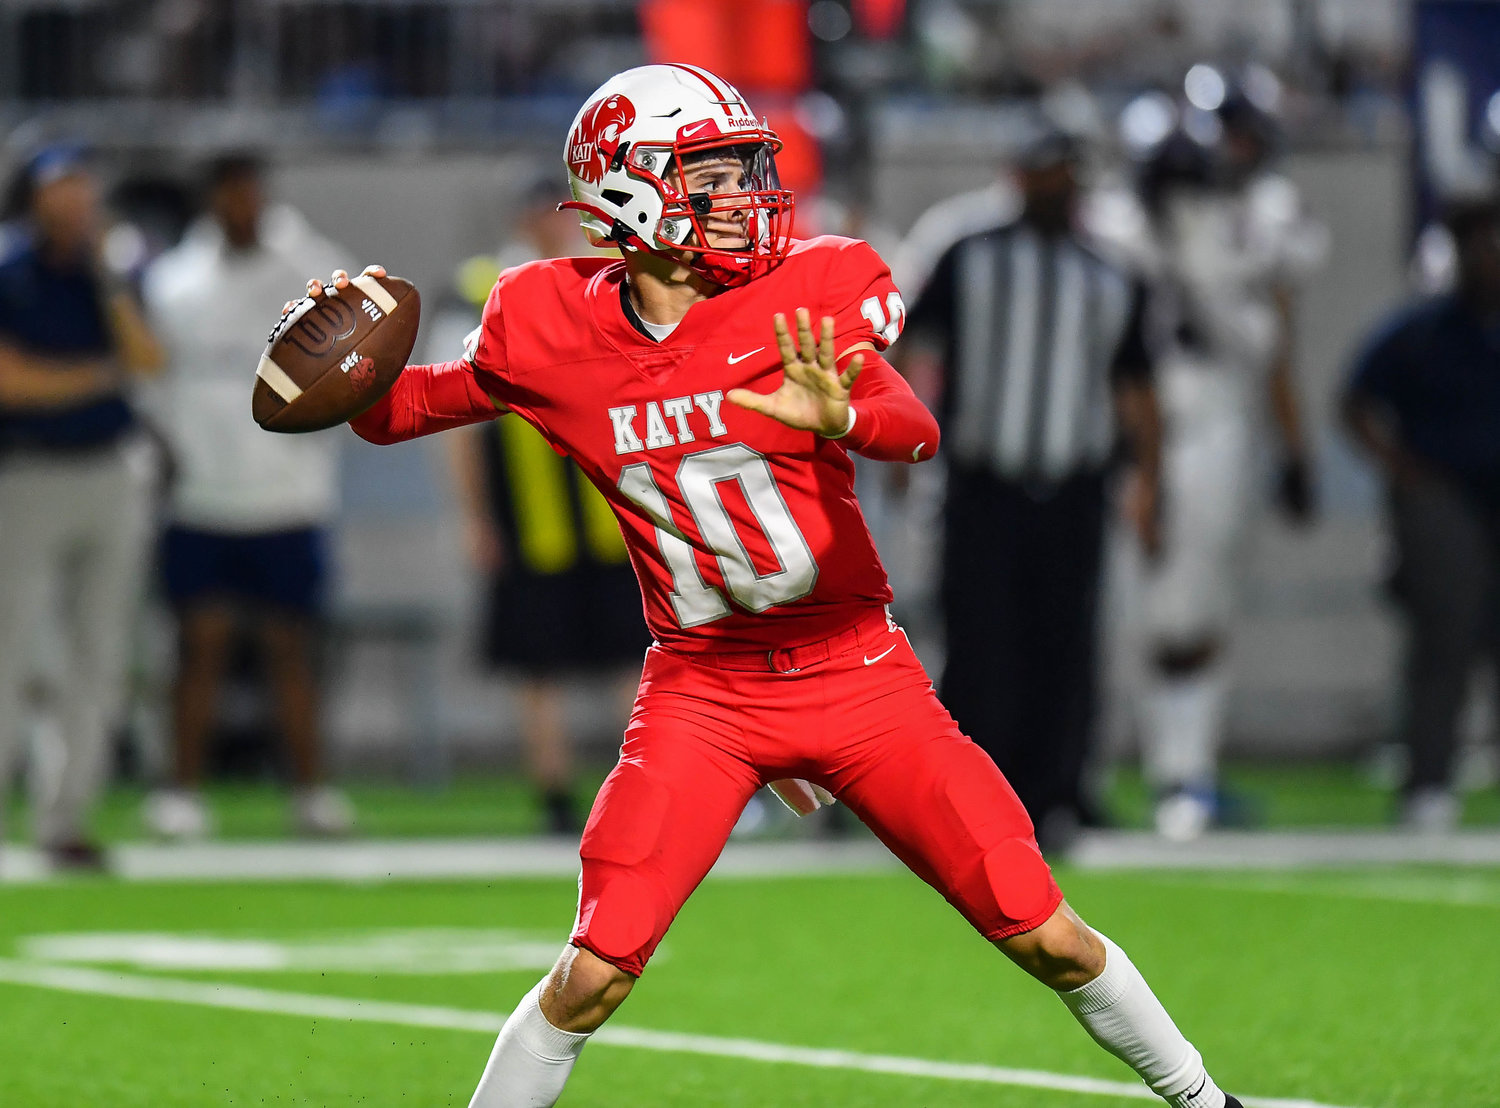 Katy, Tx. Oct. 1, 2021: Katy's #10 Caleb Koger delivers a pass for a TD during a game between Katy Tigers and Tompkins Falcons at Legacy Stadium in Katy. (Photo by Mark Goodman / Katy Times)